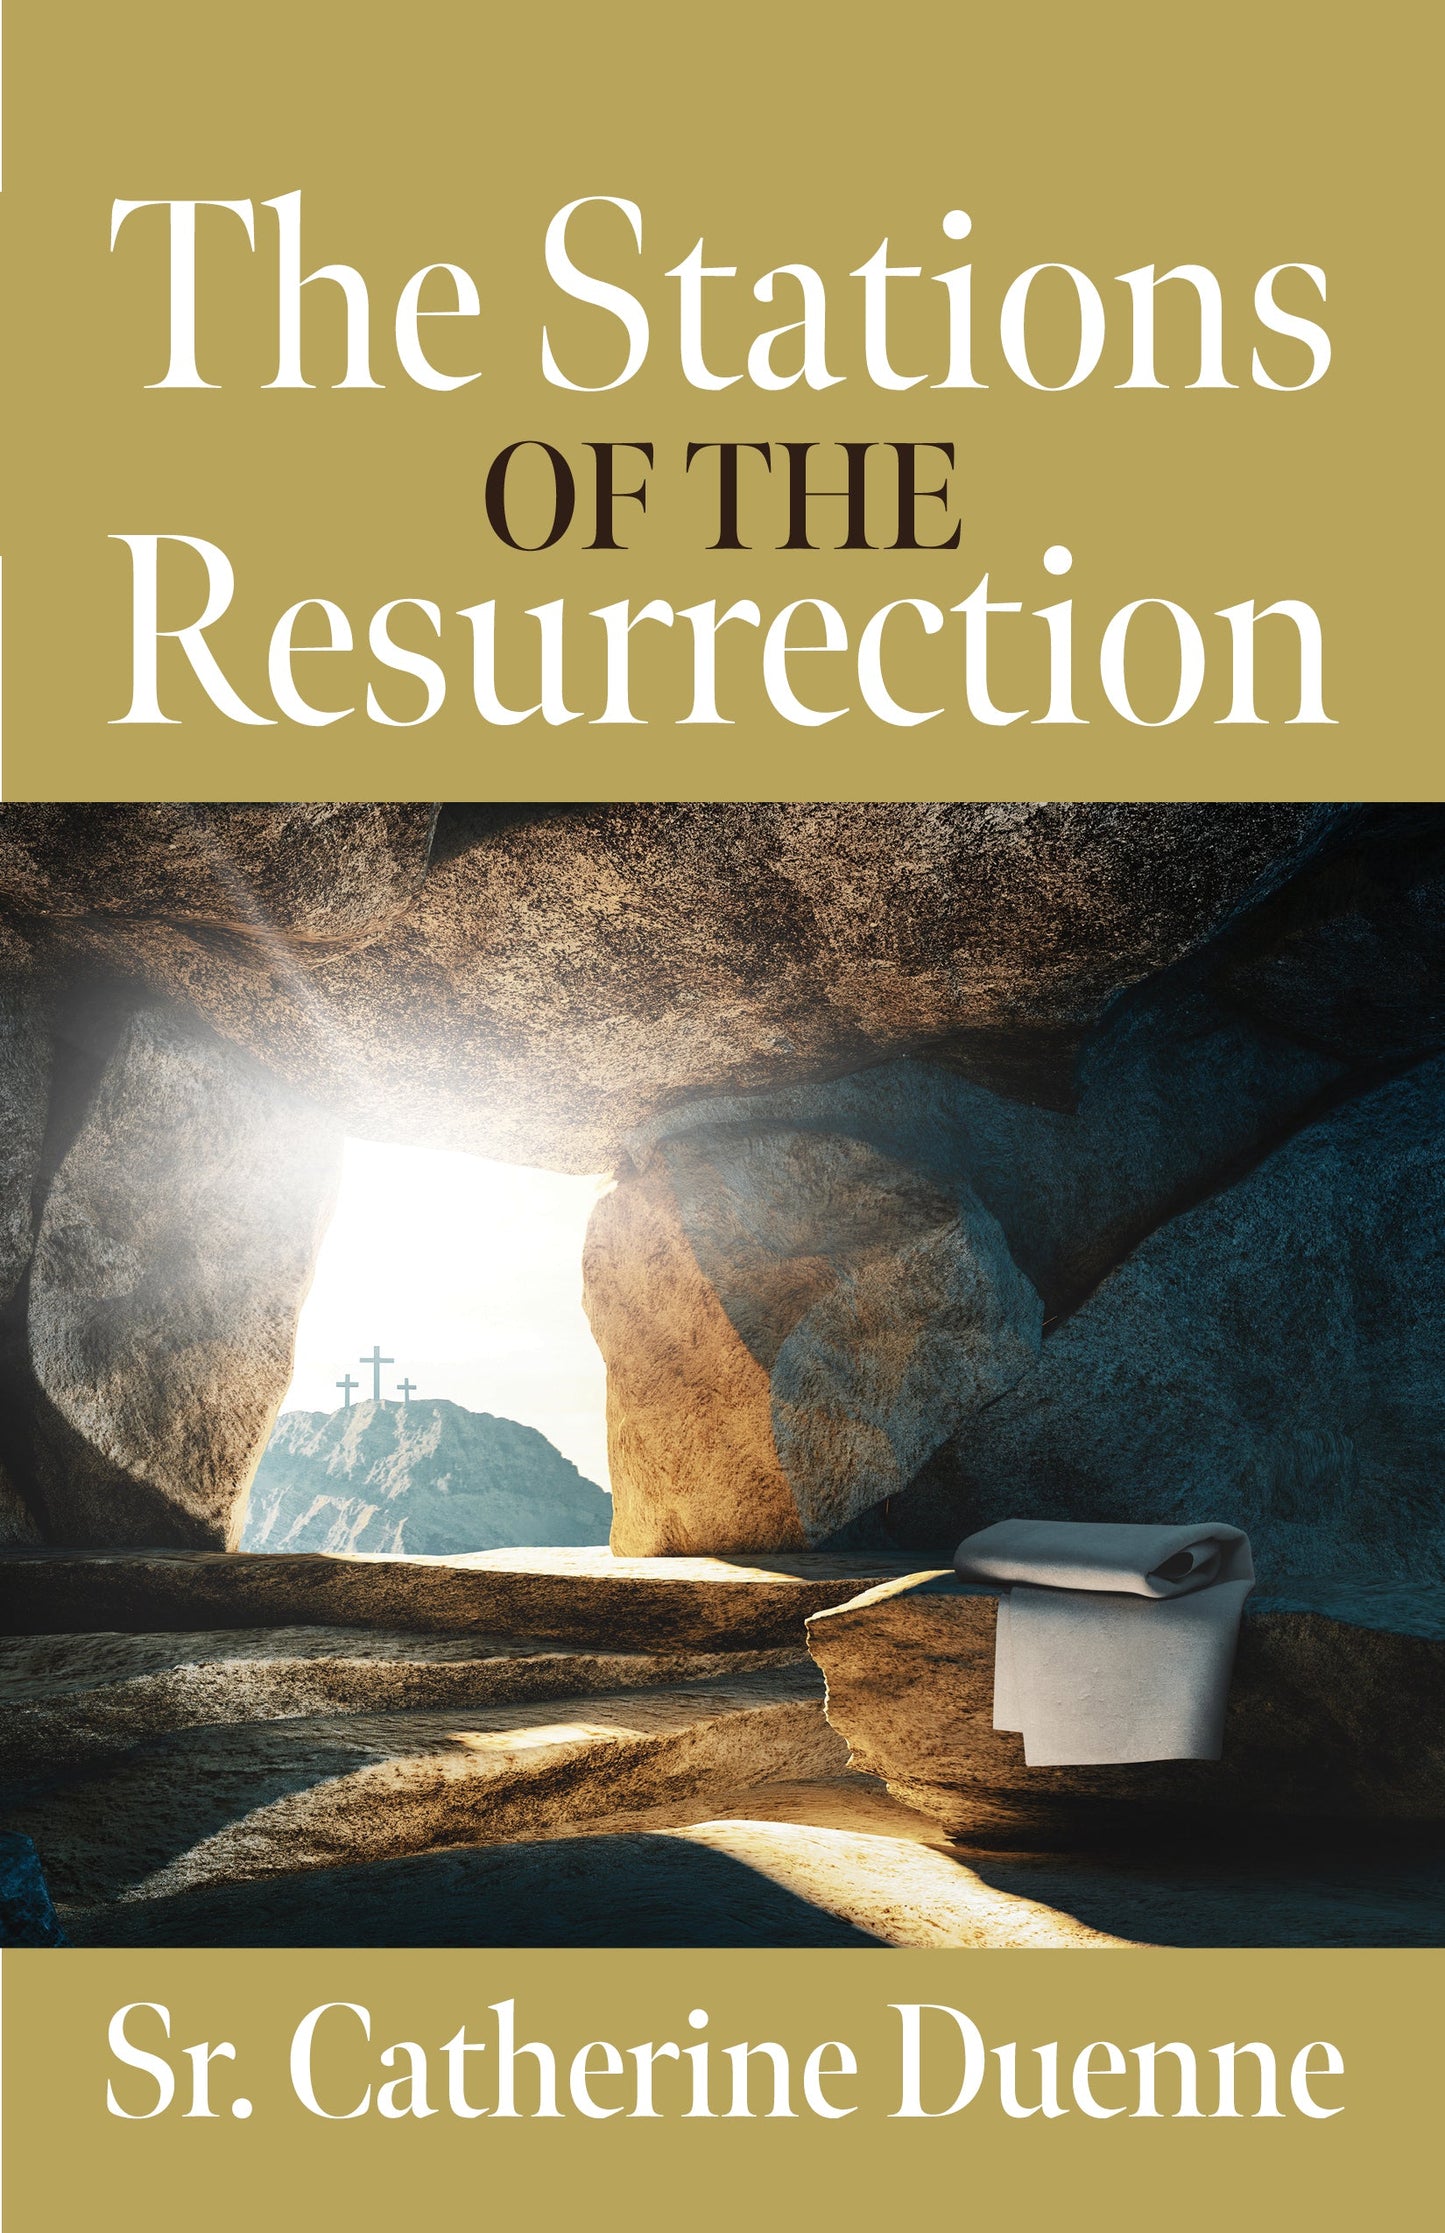 The Stations of the Resurrection